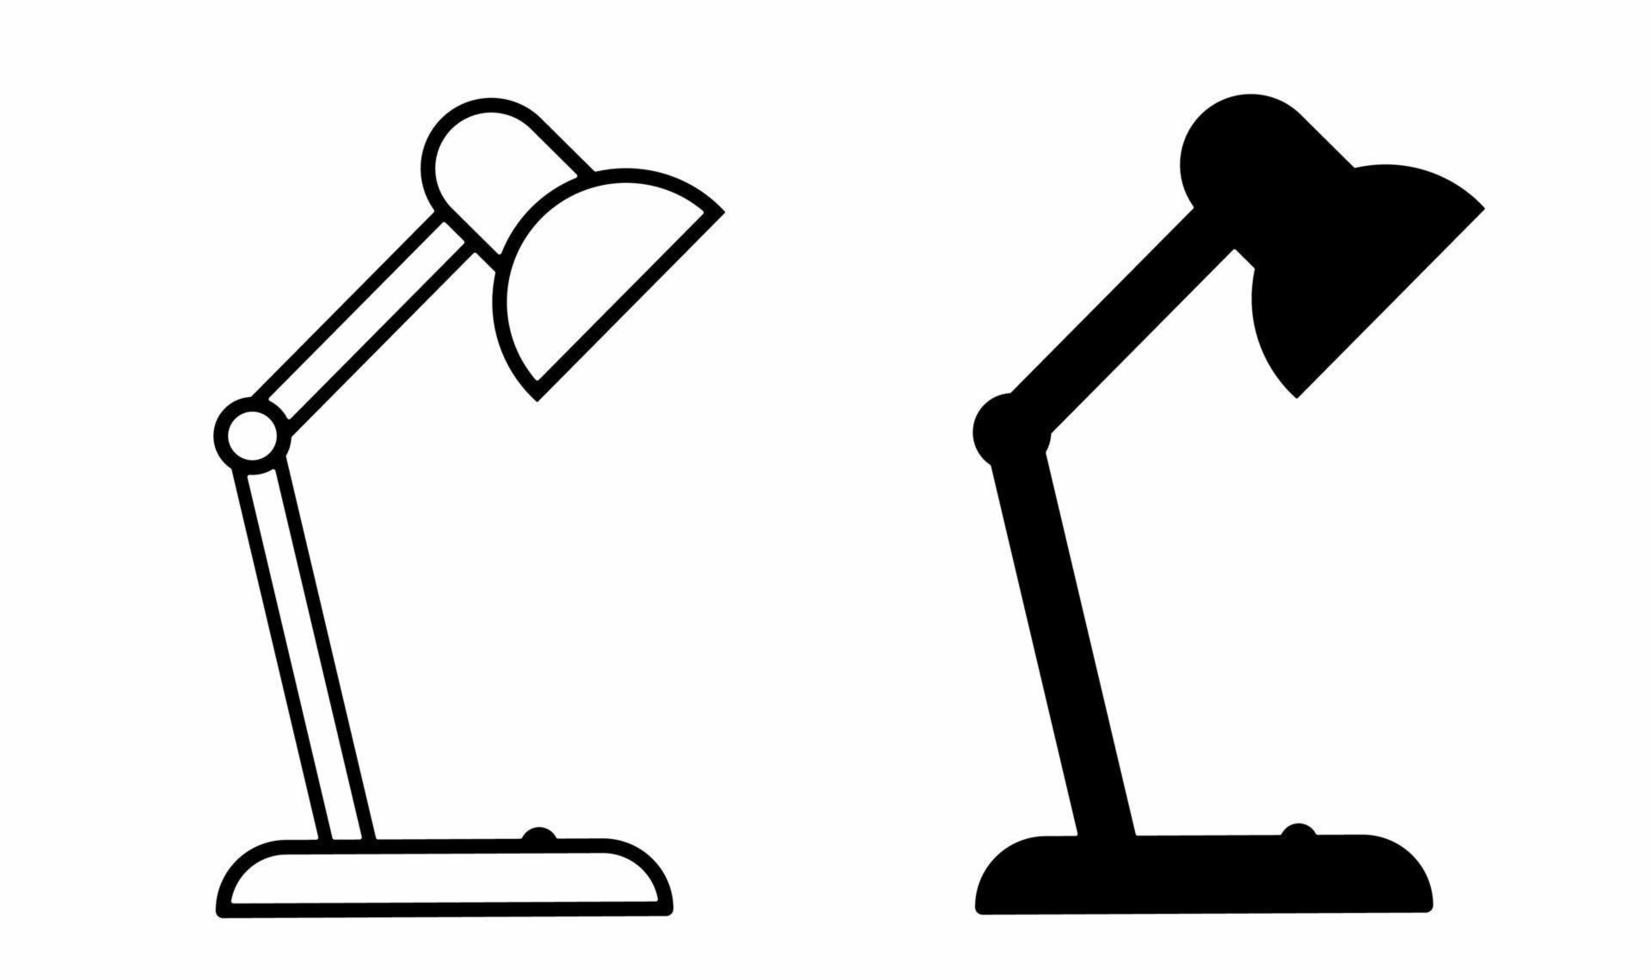 outline silhouette desk lamp icon set isolated on white background vector